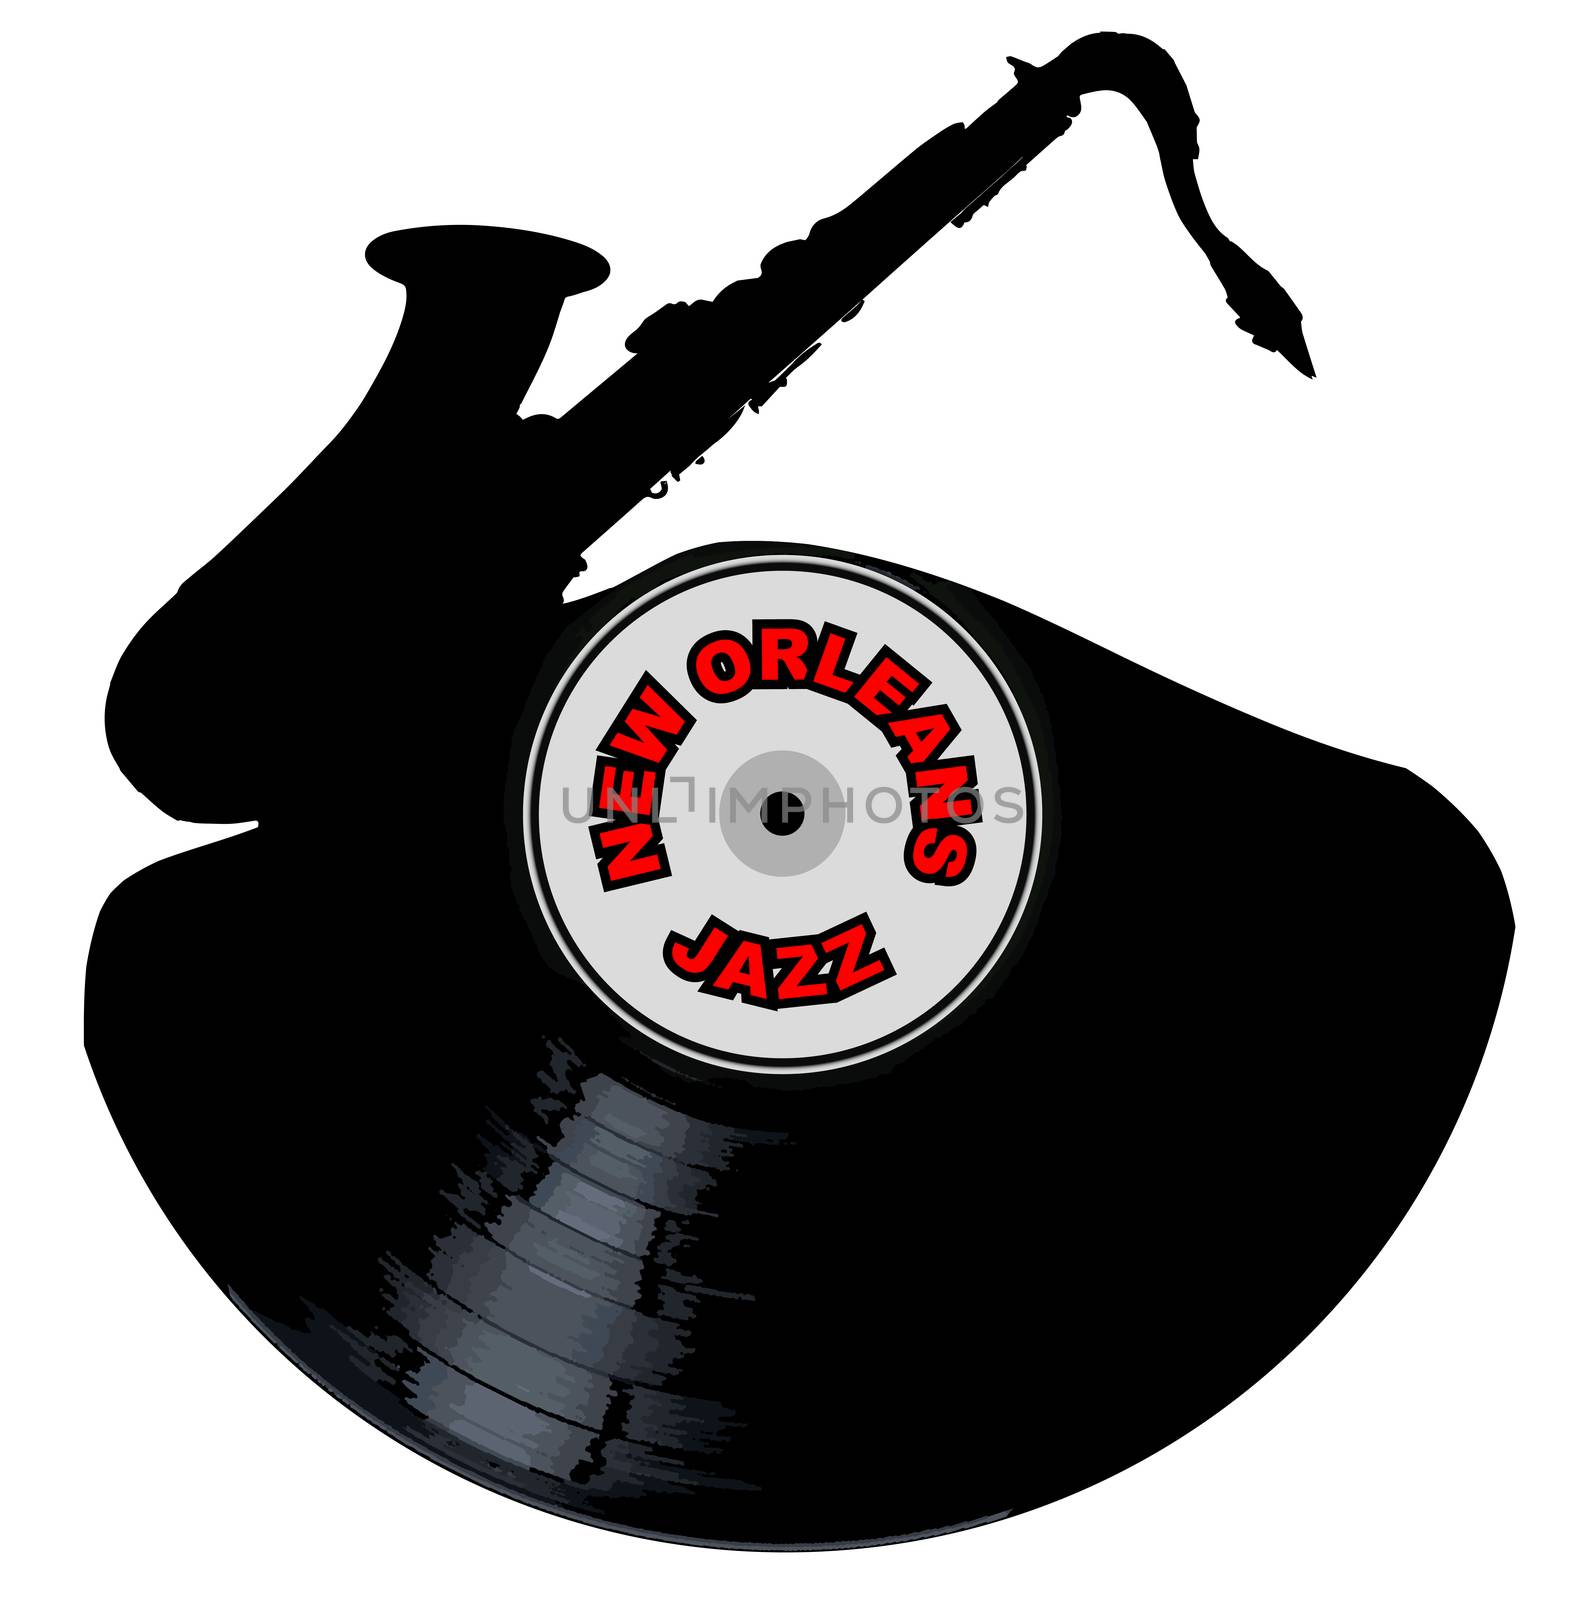 A vinyl LP record with a jazz saxophone cutout shape with the legend New Orleans Jazz all isolated on a white background